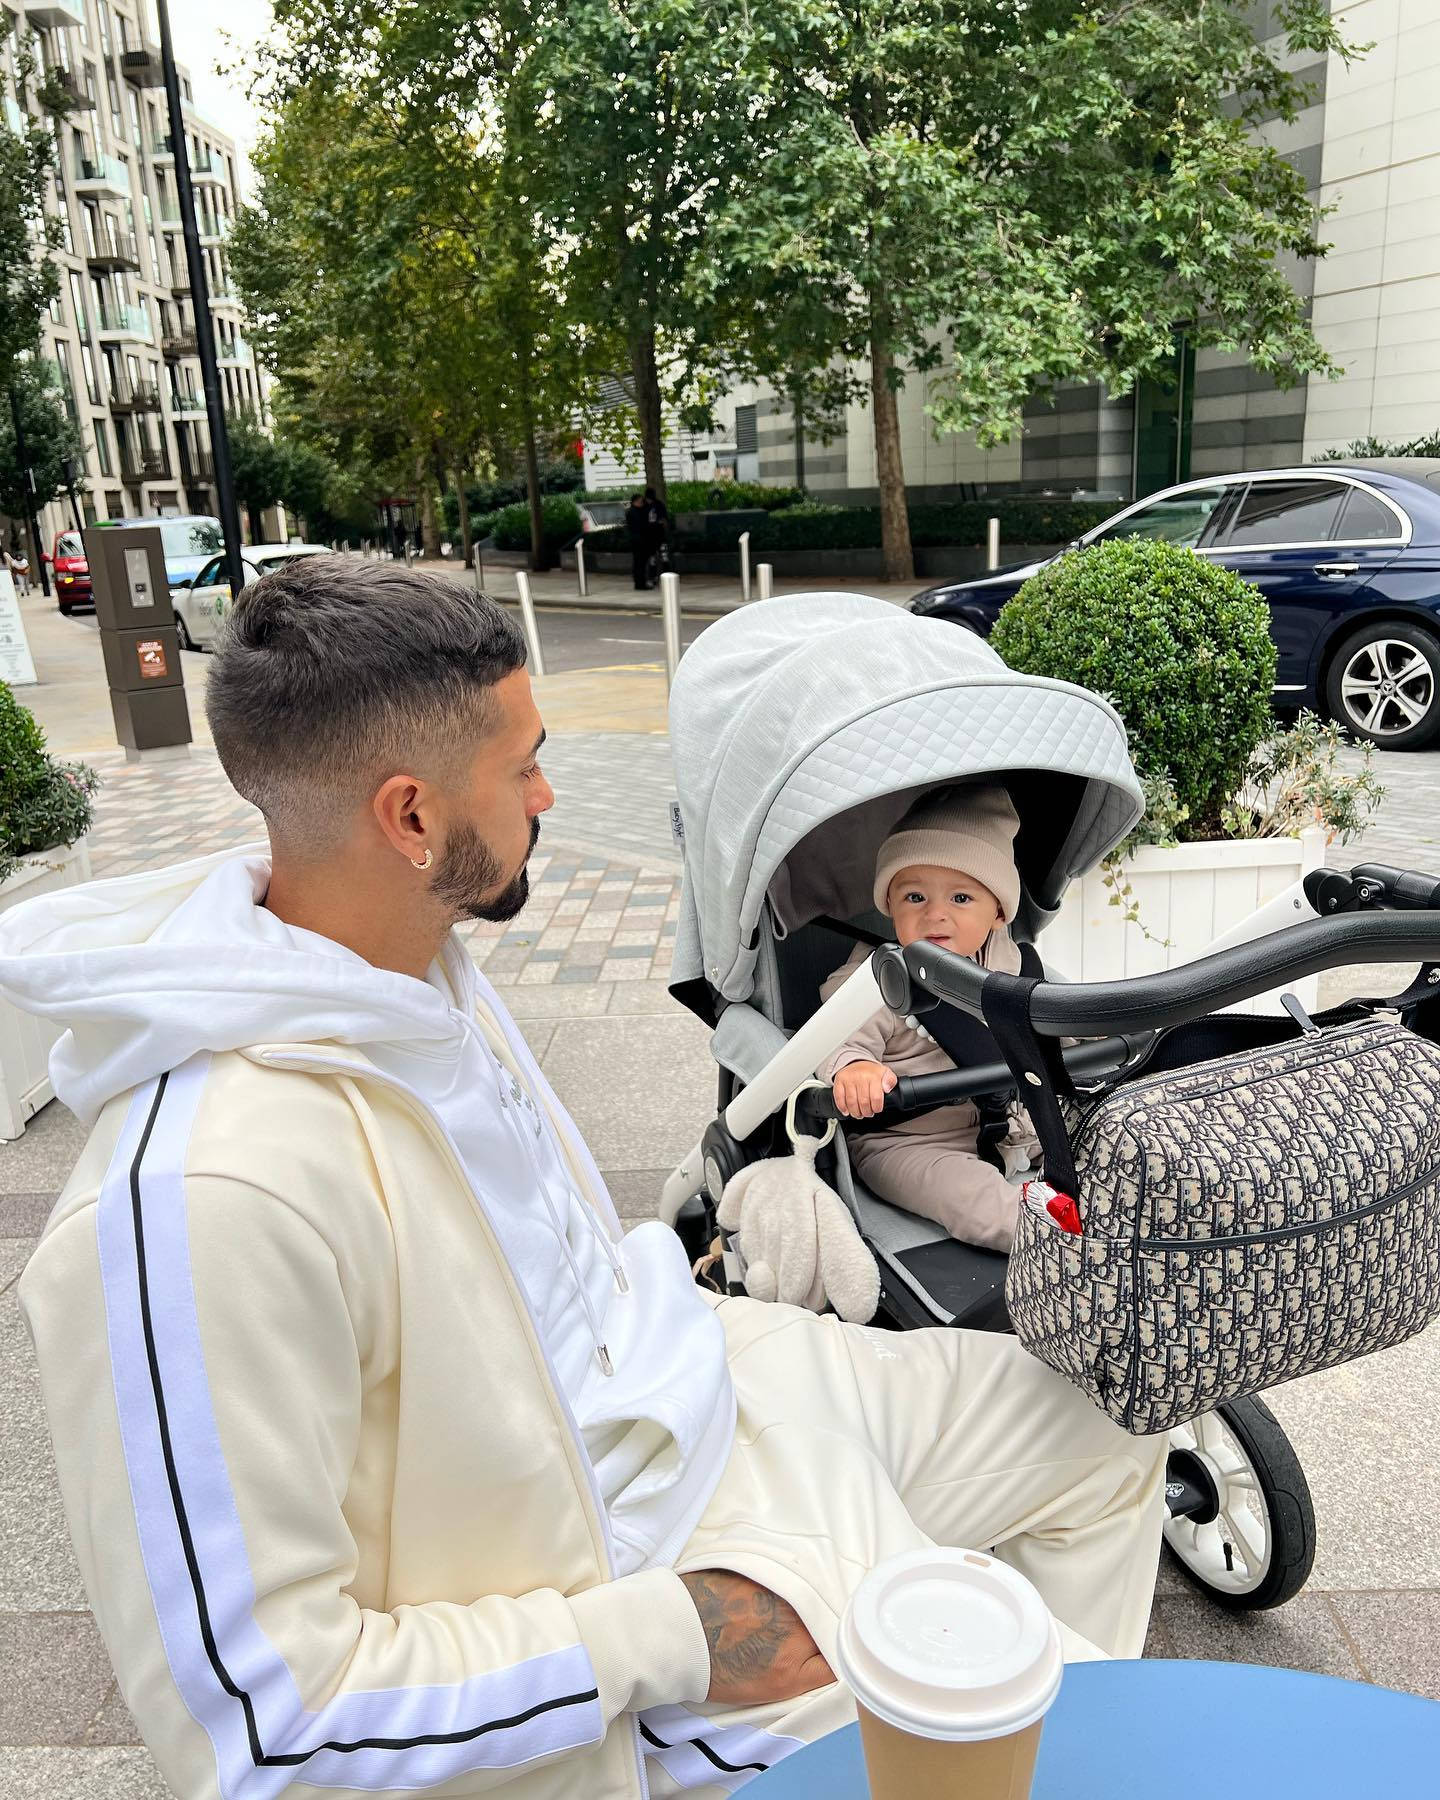 Manuel Lanzini And Baby In Stroller Wallpaper